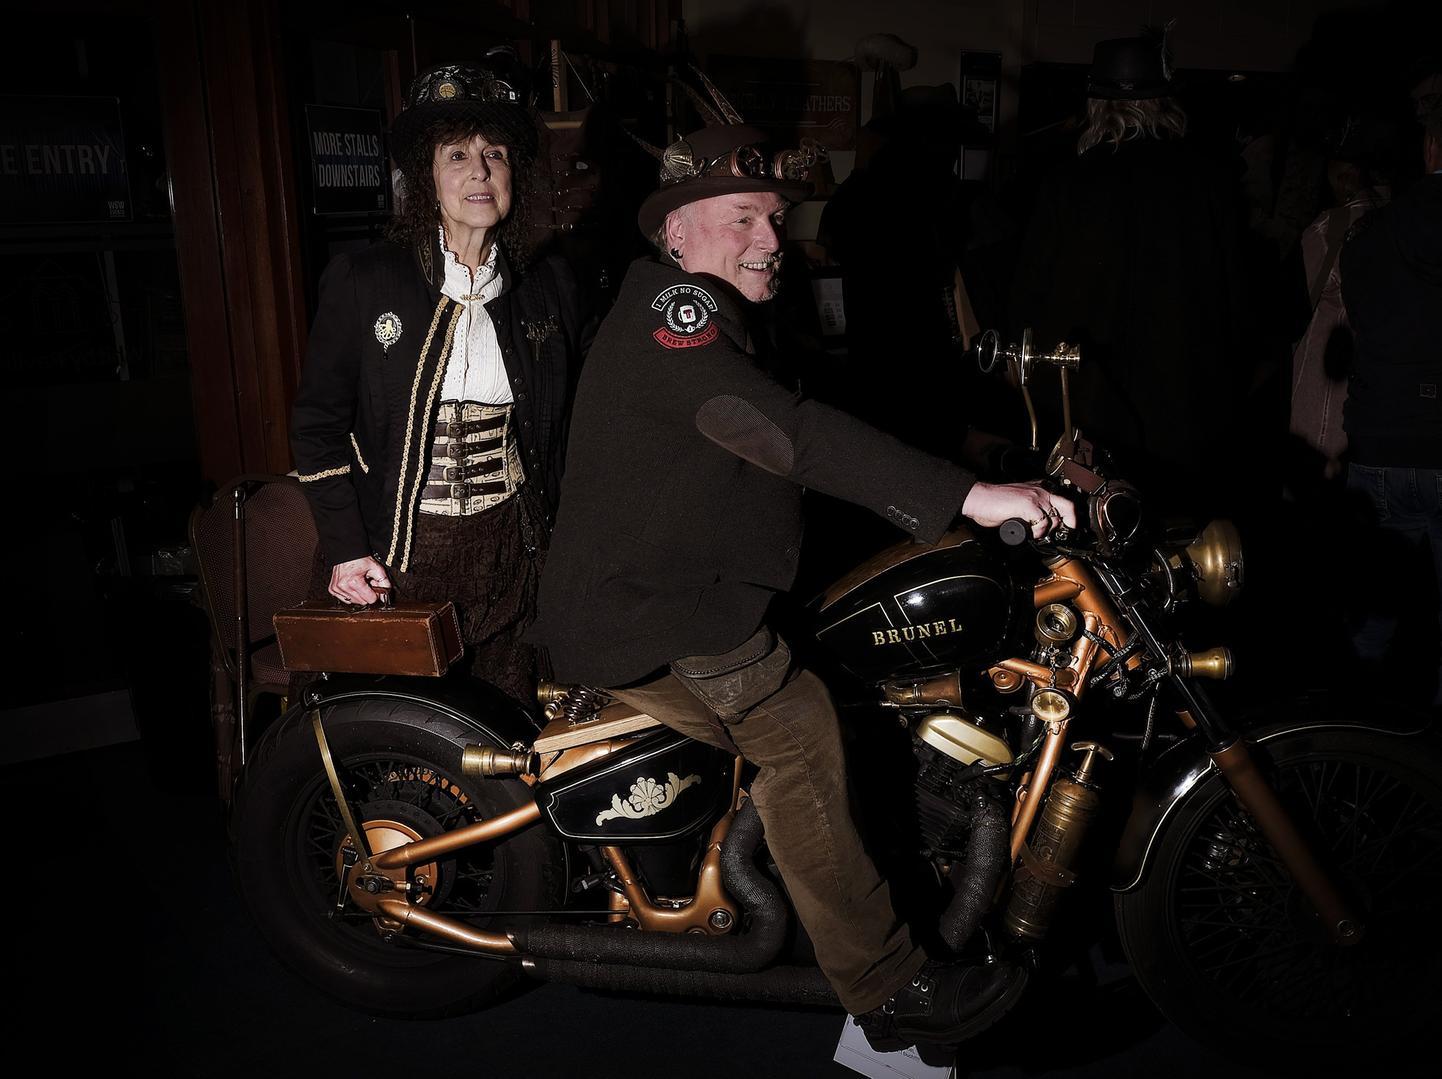 Jools and Spyke Reay with their motorbike exhibit at the Pavilion